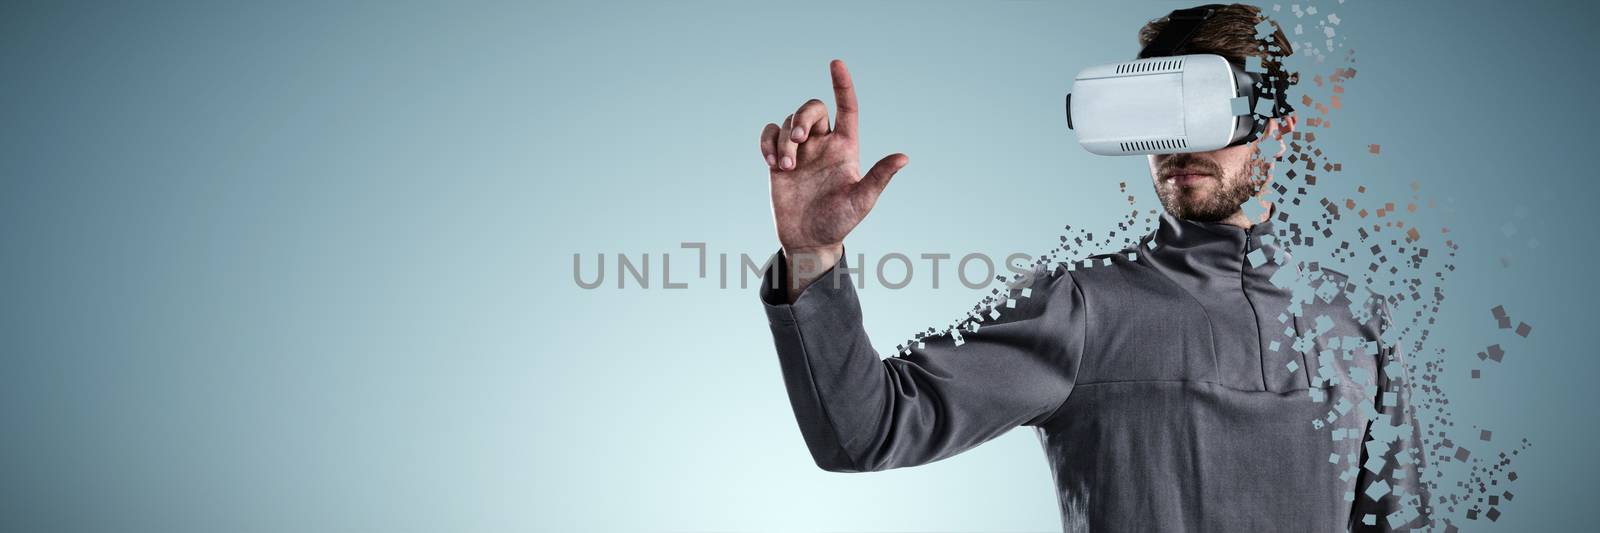 Composite image of man gesturing while using virtual reality headset by Wavebreakmedia